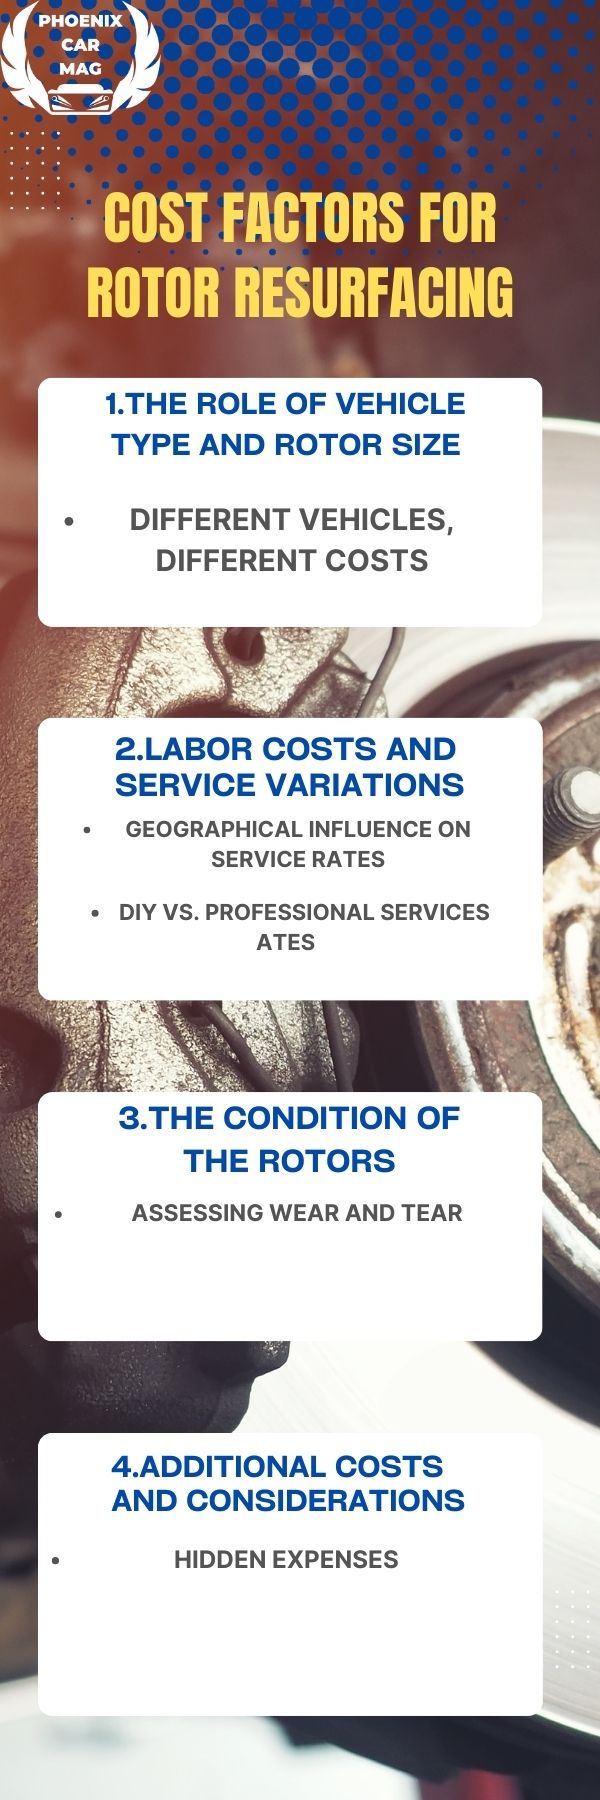 an infographic about Cost Factors for Rotor Resurfacing